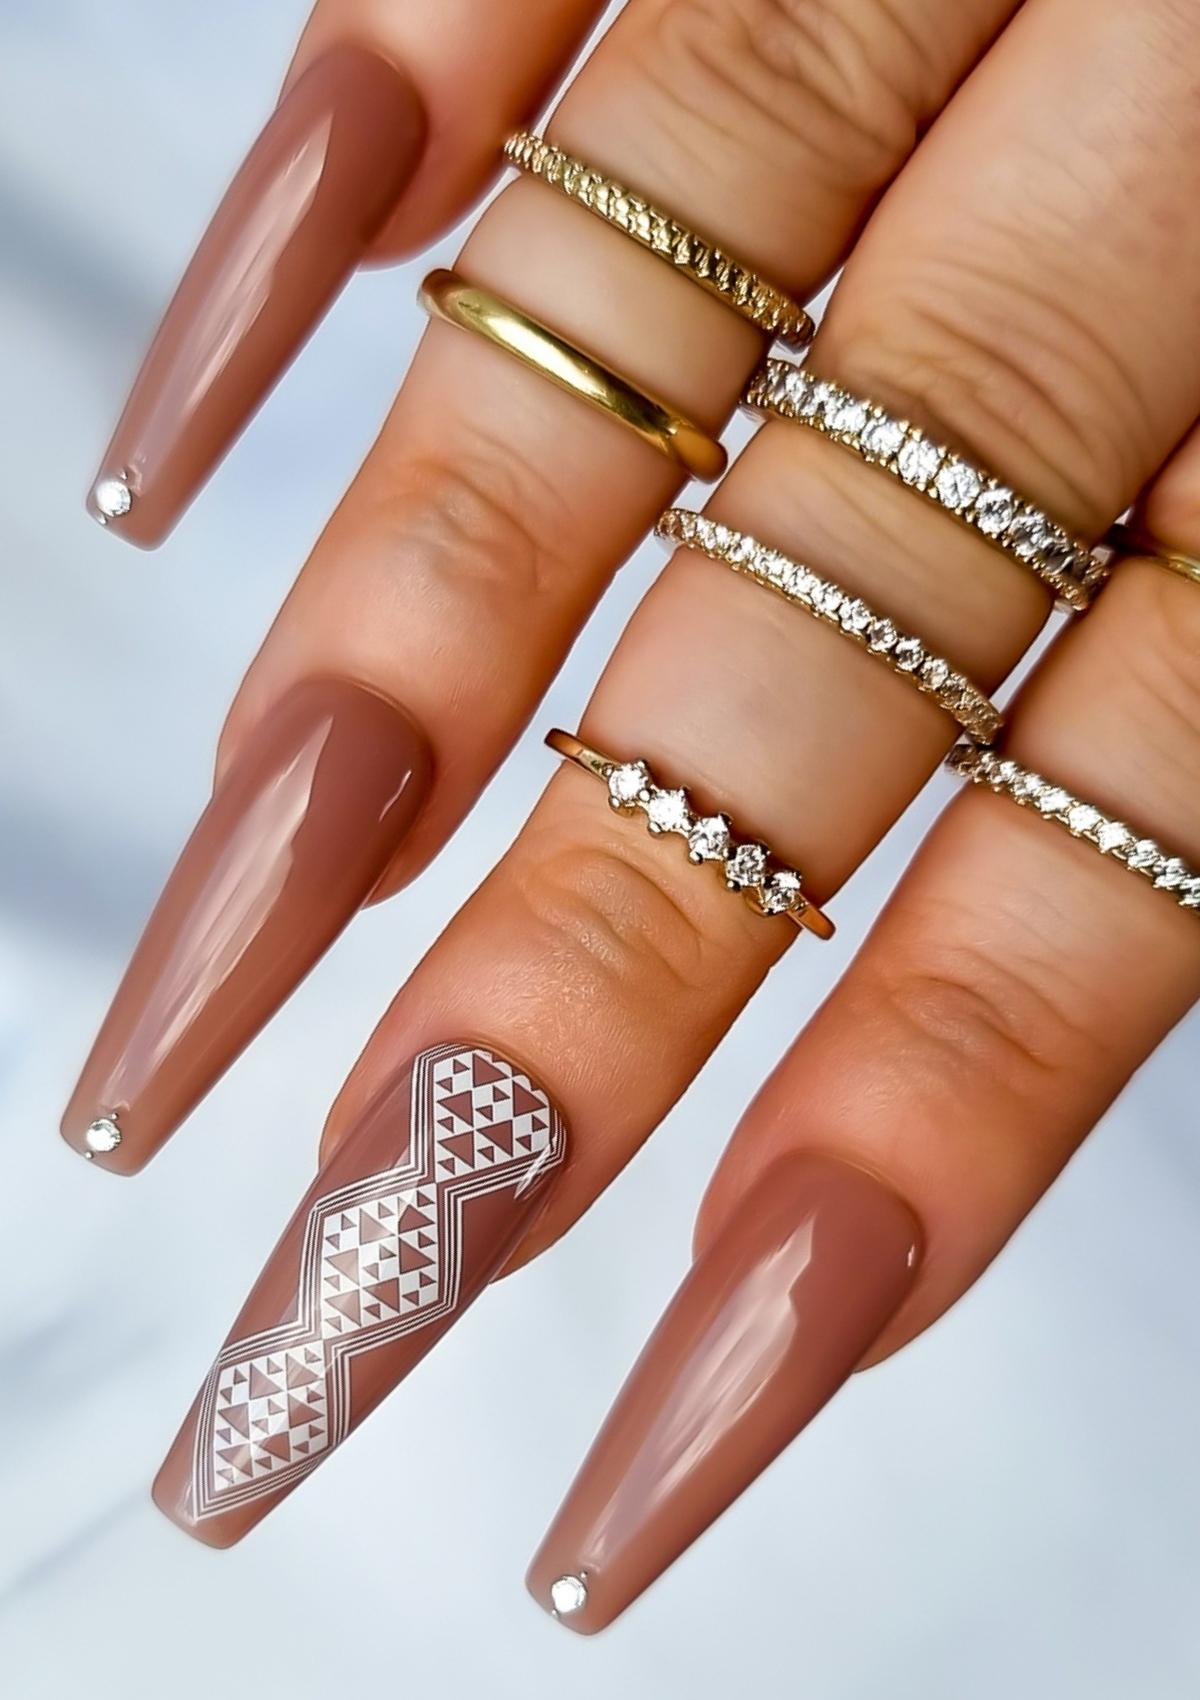 Long coffin shaped nails in light brown with white Maori nail art on the middle finger. Nail art design in Aonui pattern by Adrienne Whitewood.  